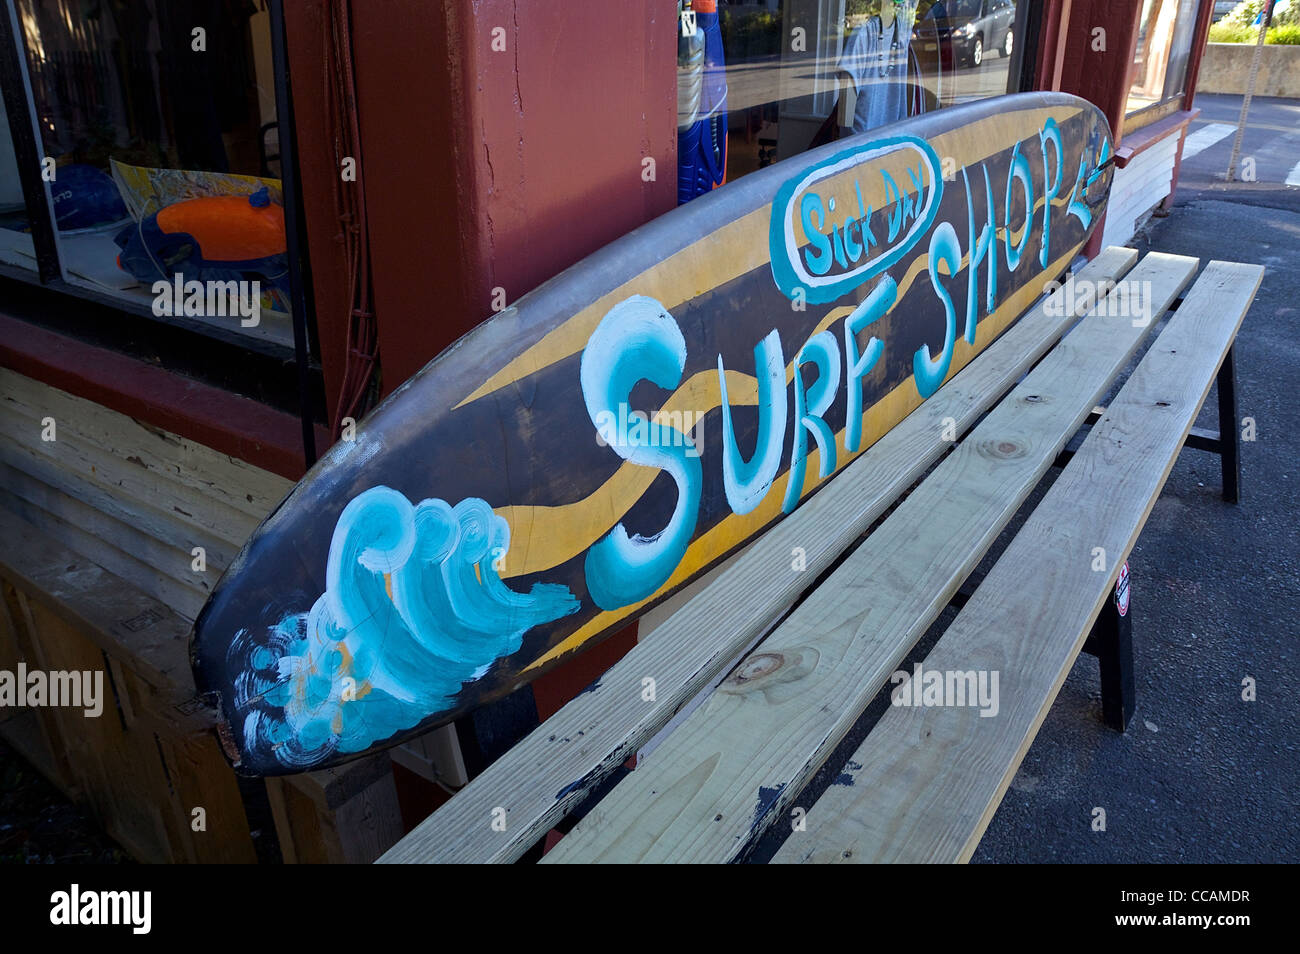 A sign on a surfboard outside a surf shop Stock Photo